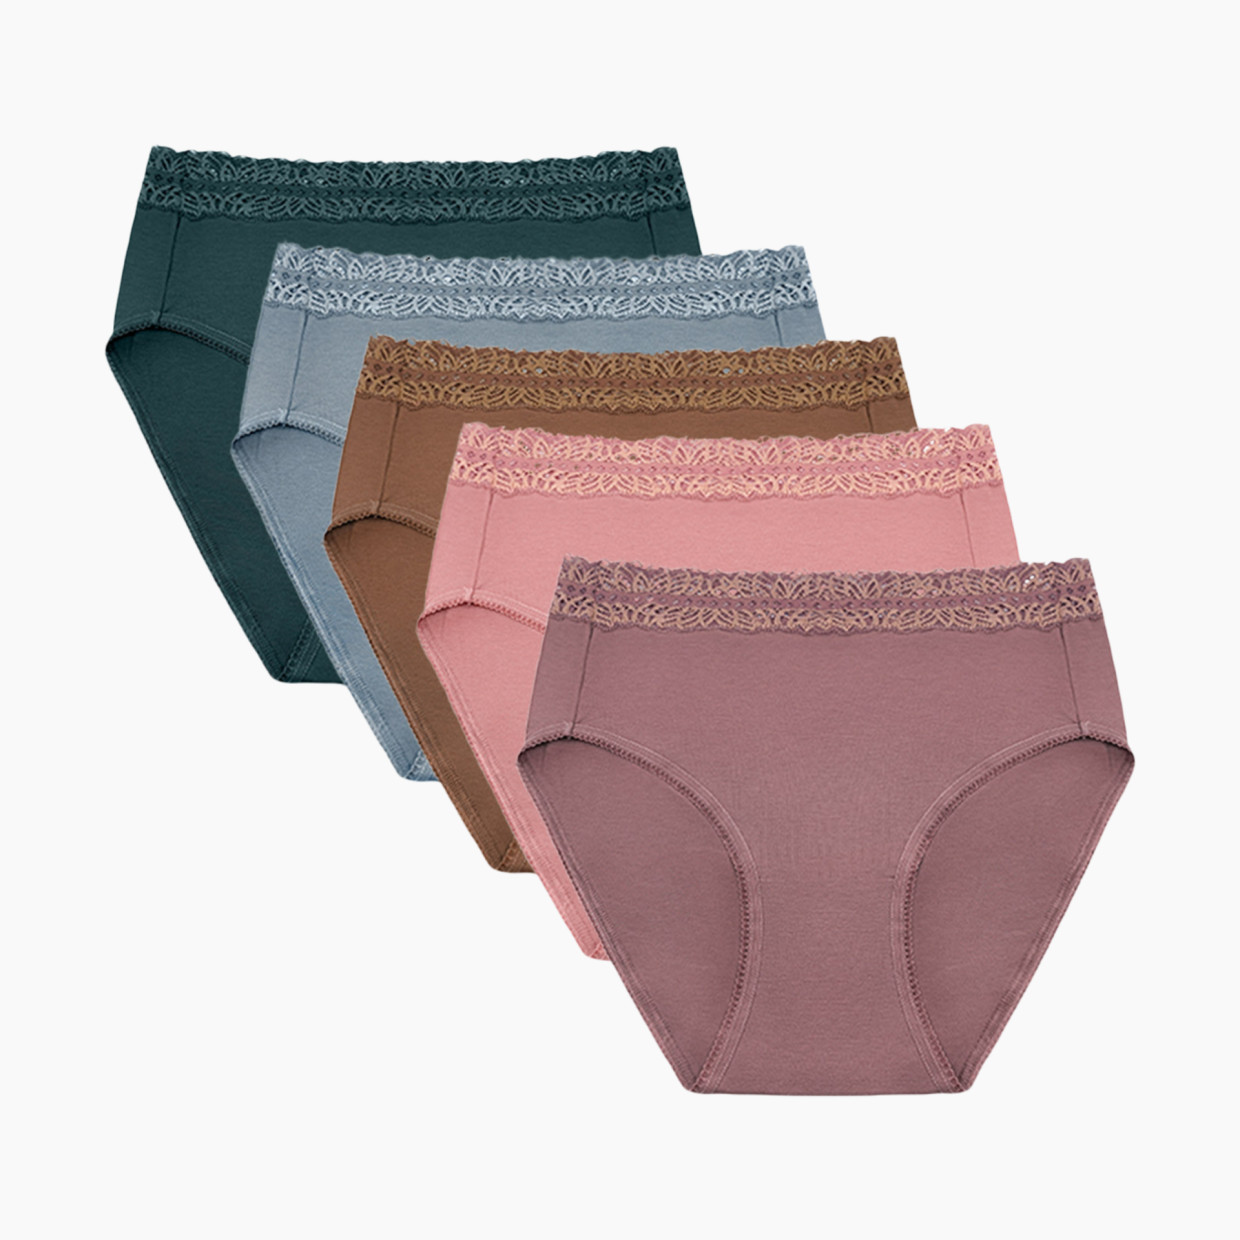 Kindred Bravely High Waist Postpartum Underwear & C-Section Recovery Maternity Panties (5 Pack) - Dusty Hues, Medium.